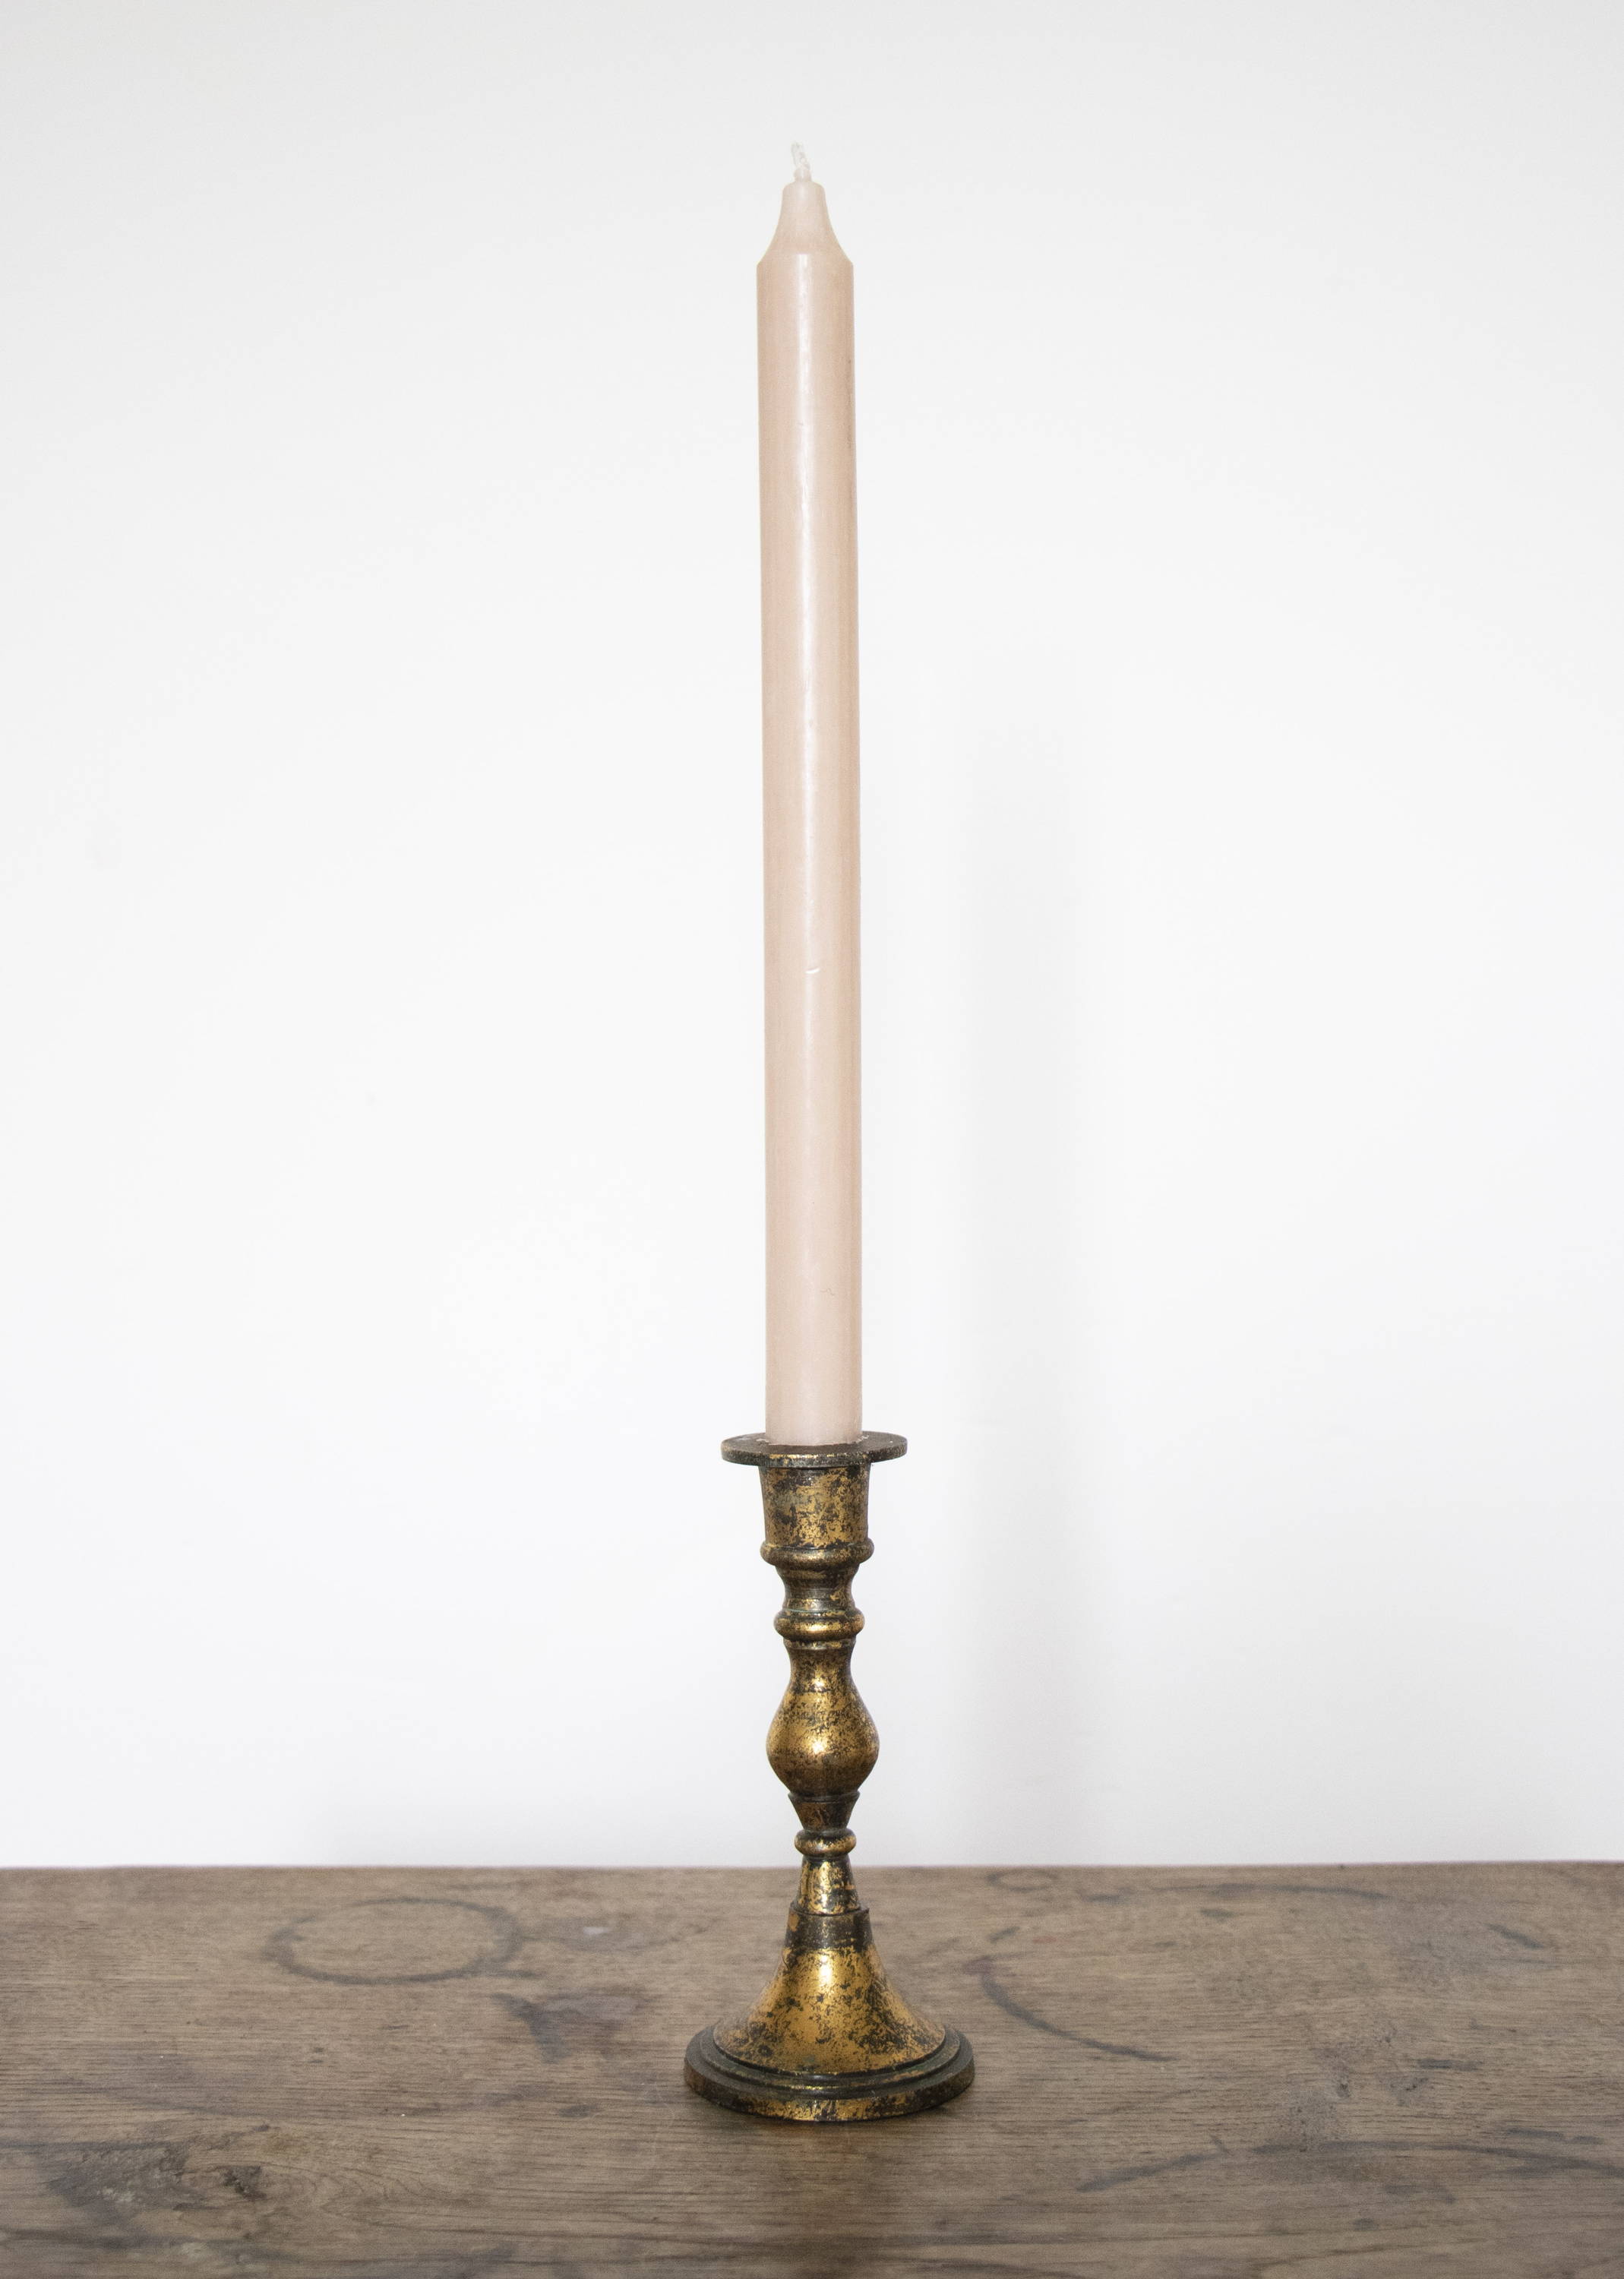 A cold vintaged style candlestick